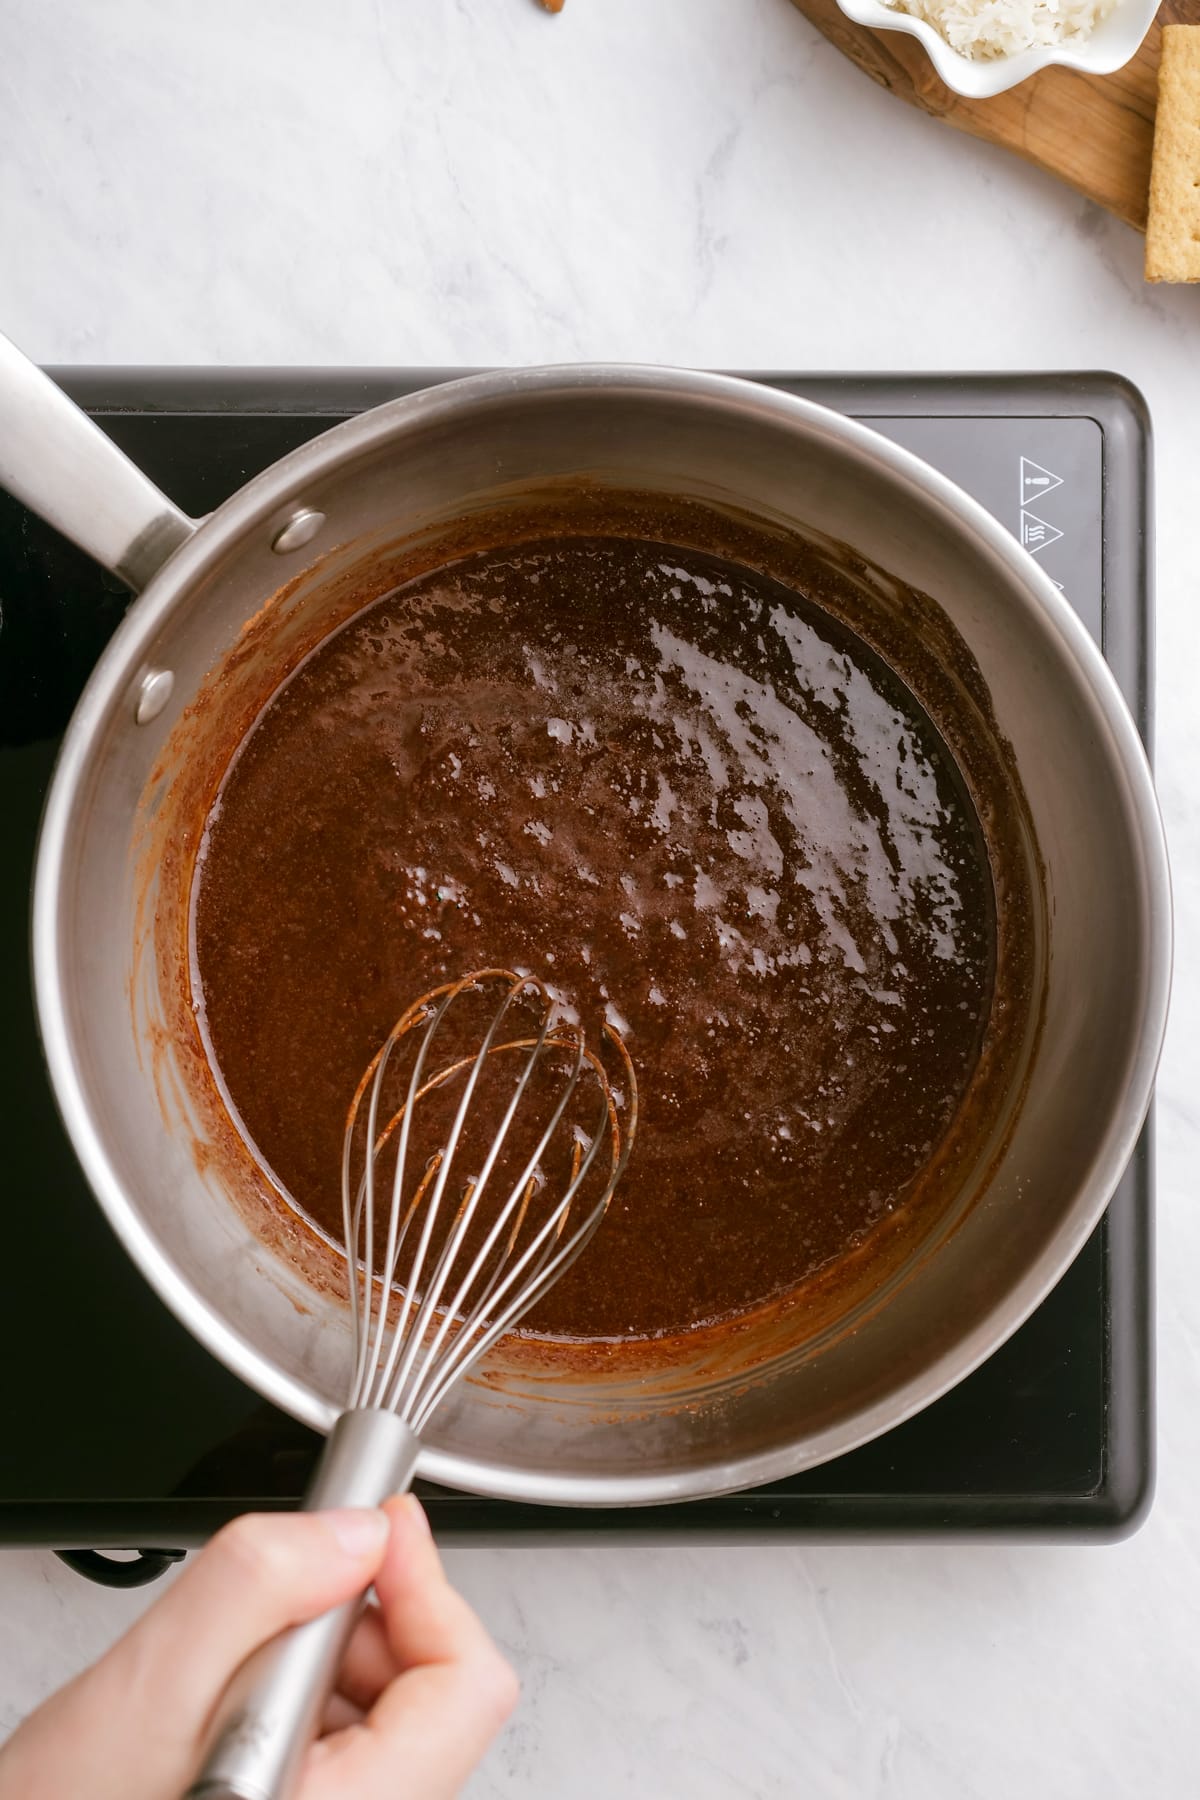 melted chocolate in a pan on the stove